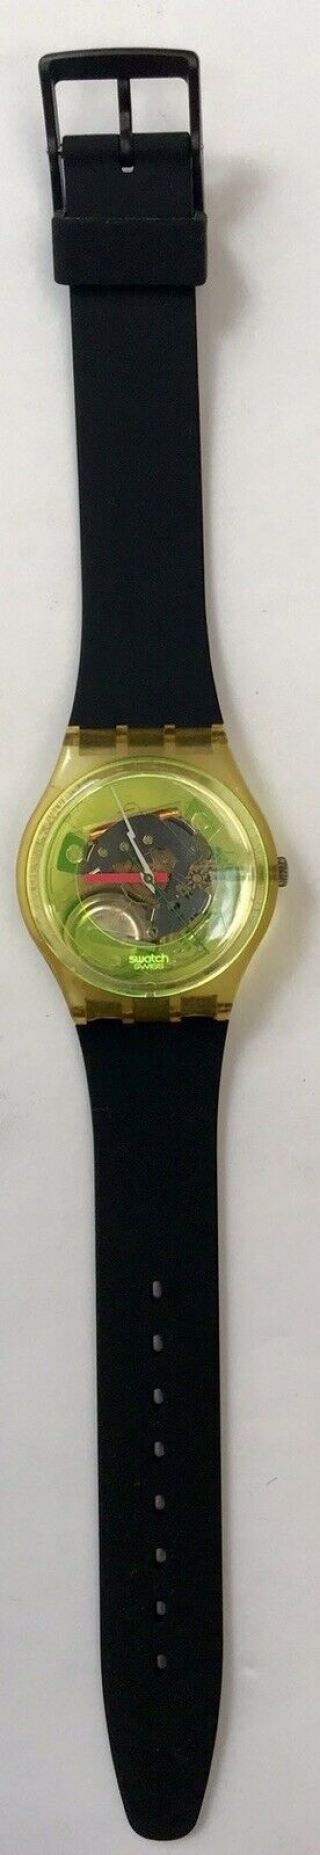 Swatch Watch Techno Sphere Gk101 Vintage Polished Crystal Battery Band 8